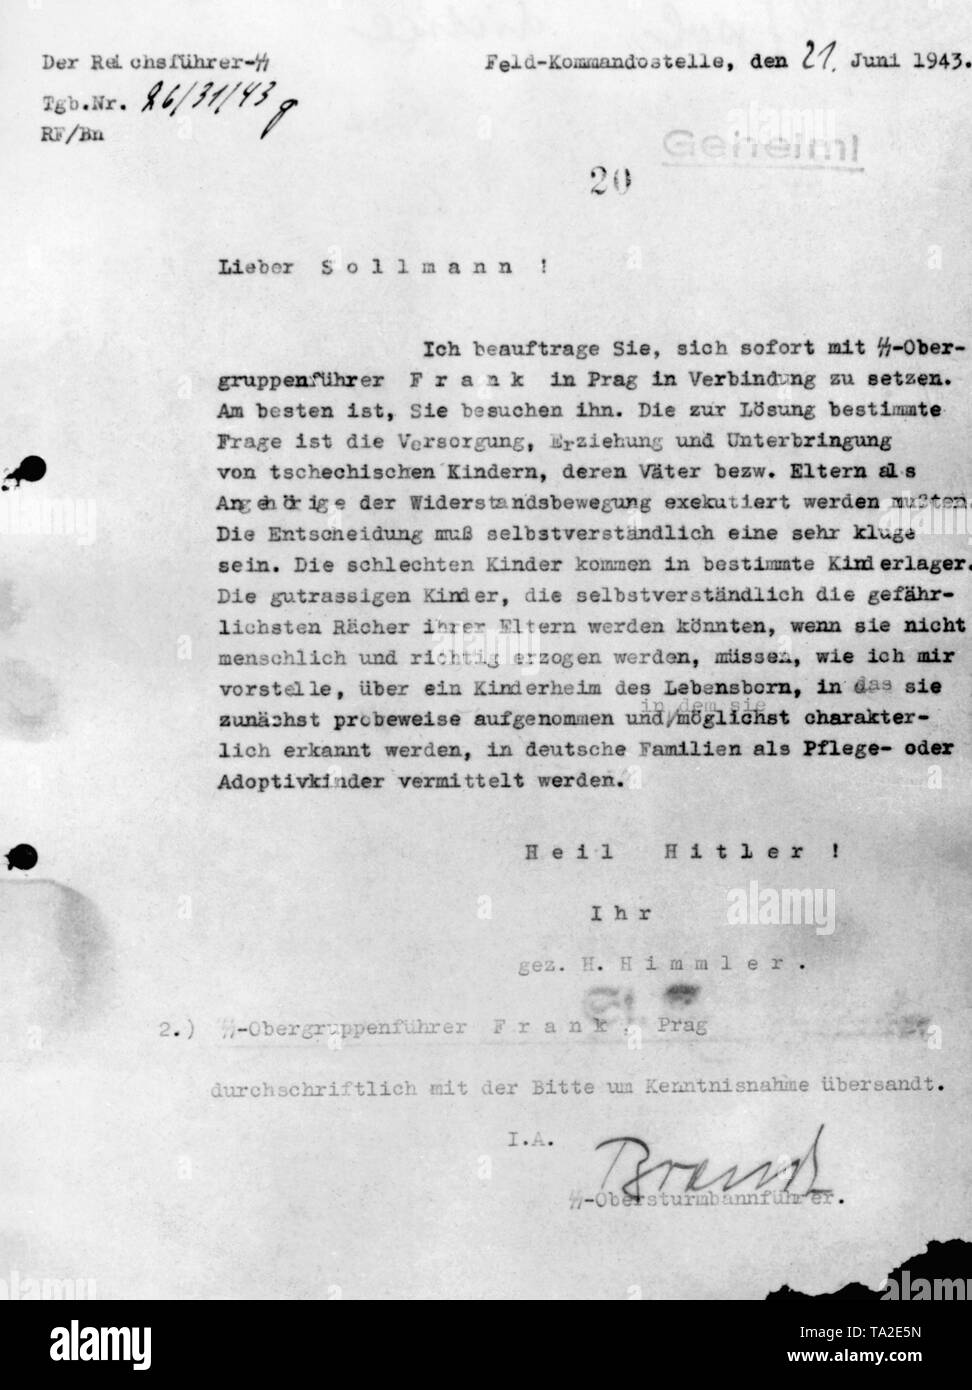 Decision of Reichsfuehrer SS Heinrich Himmler on the children of Lidice. The children should either be sent to concentration camps or to Lebensborn homes. In the course of the successful Operation Anthropoid, it came to retaliation against the Czech population. The Czech village Lidice was completely destroyed by the Wehrmacht on June 10, 1942. The men were shot dead, and the women and children were brought to concentration camps. Stock Photo